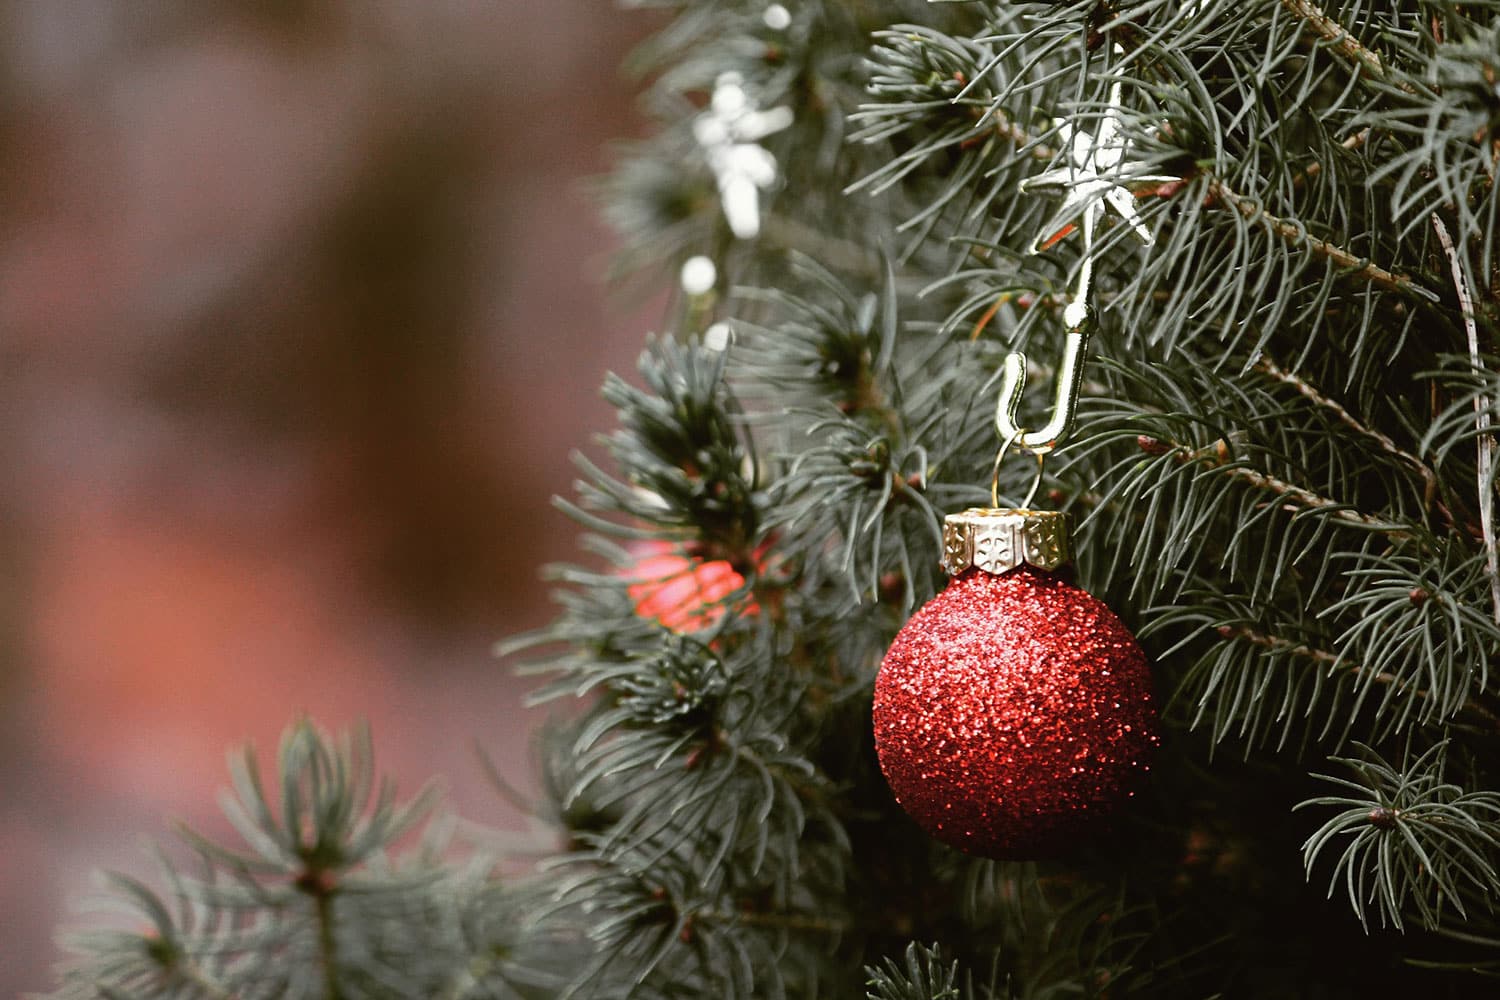 Discarded Christmas trees could be turned into renewable fuels.